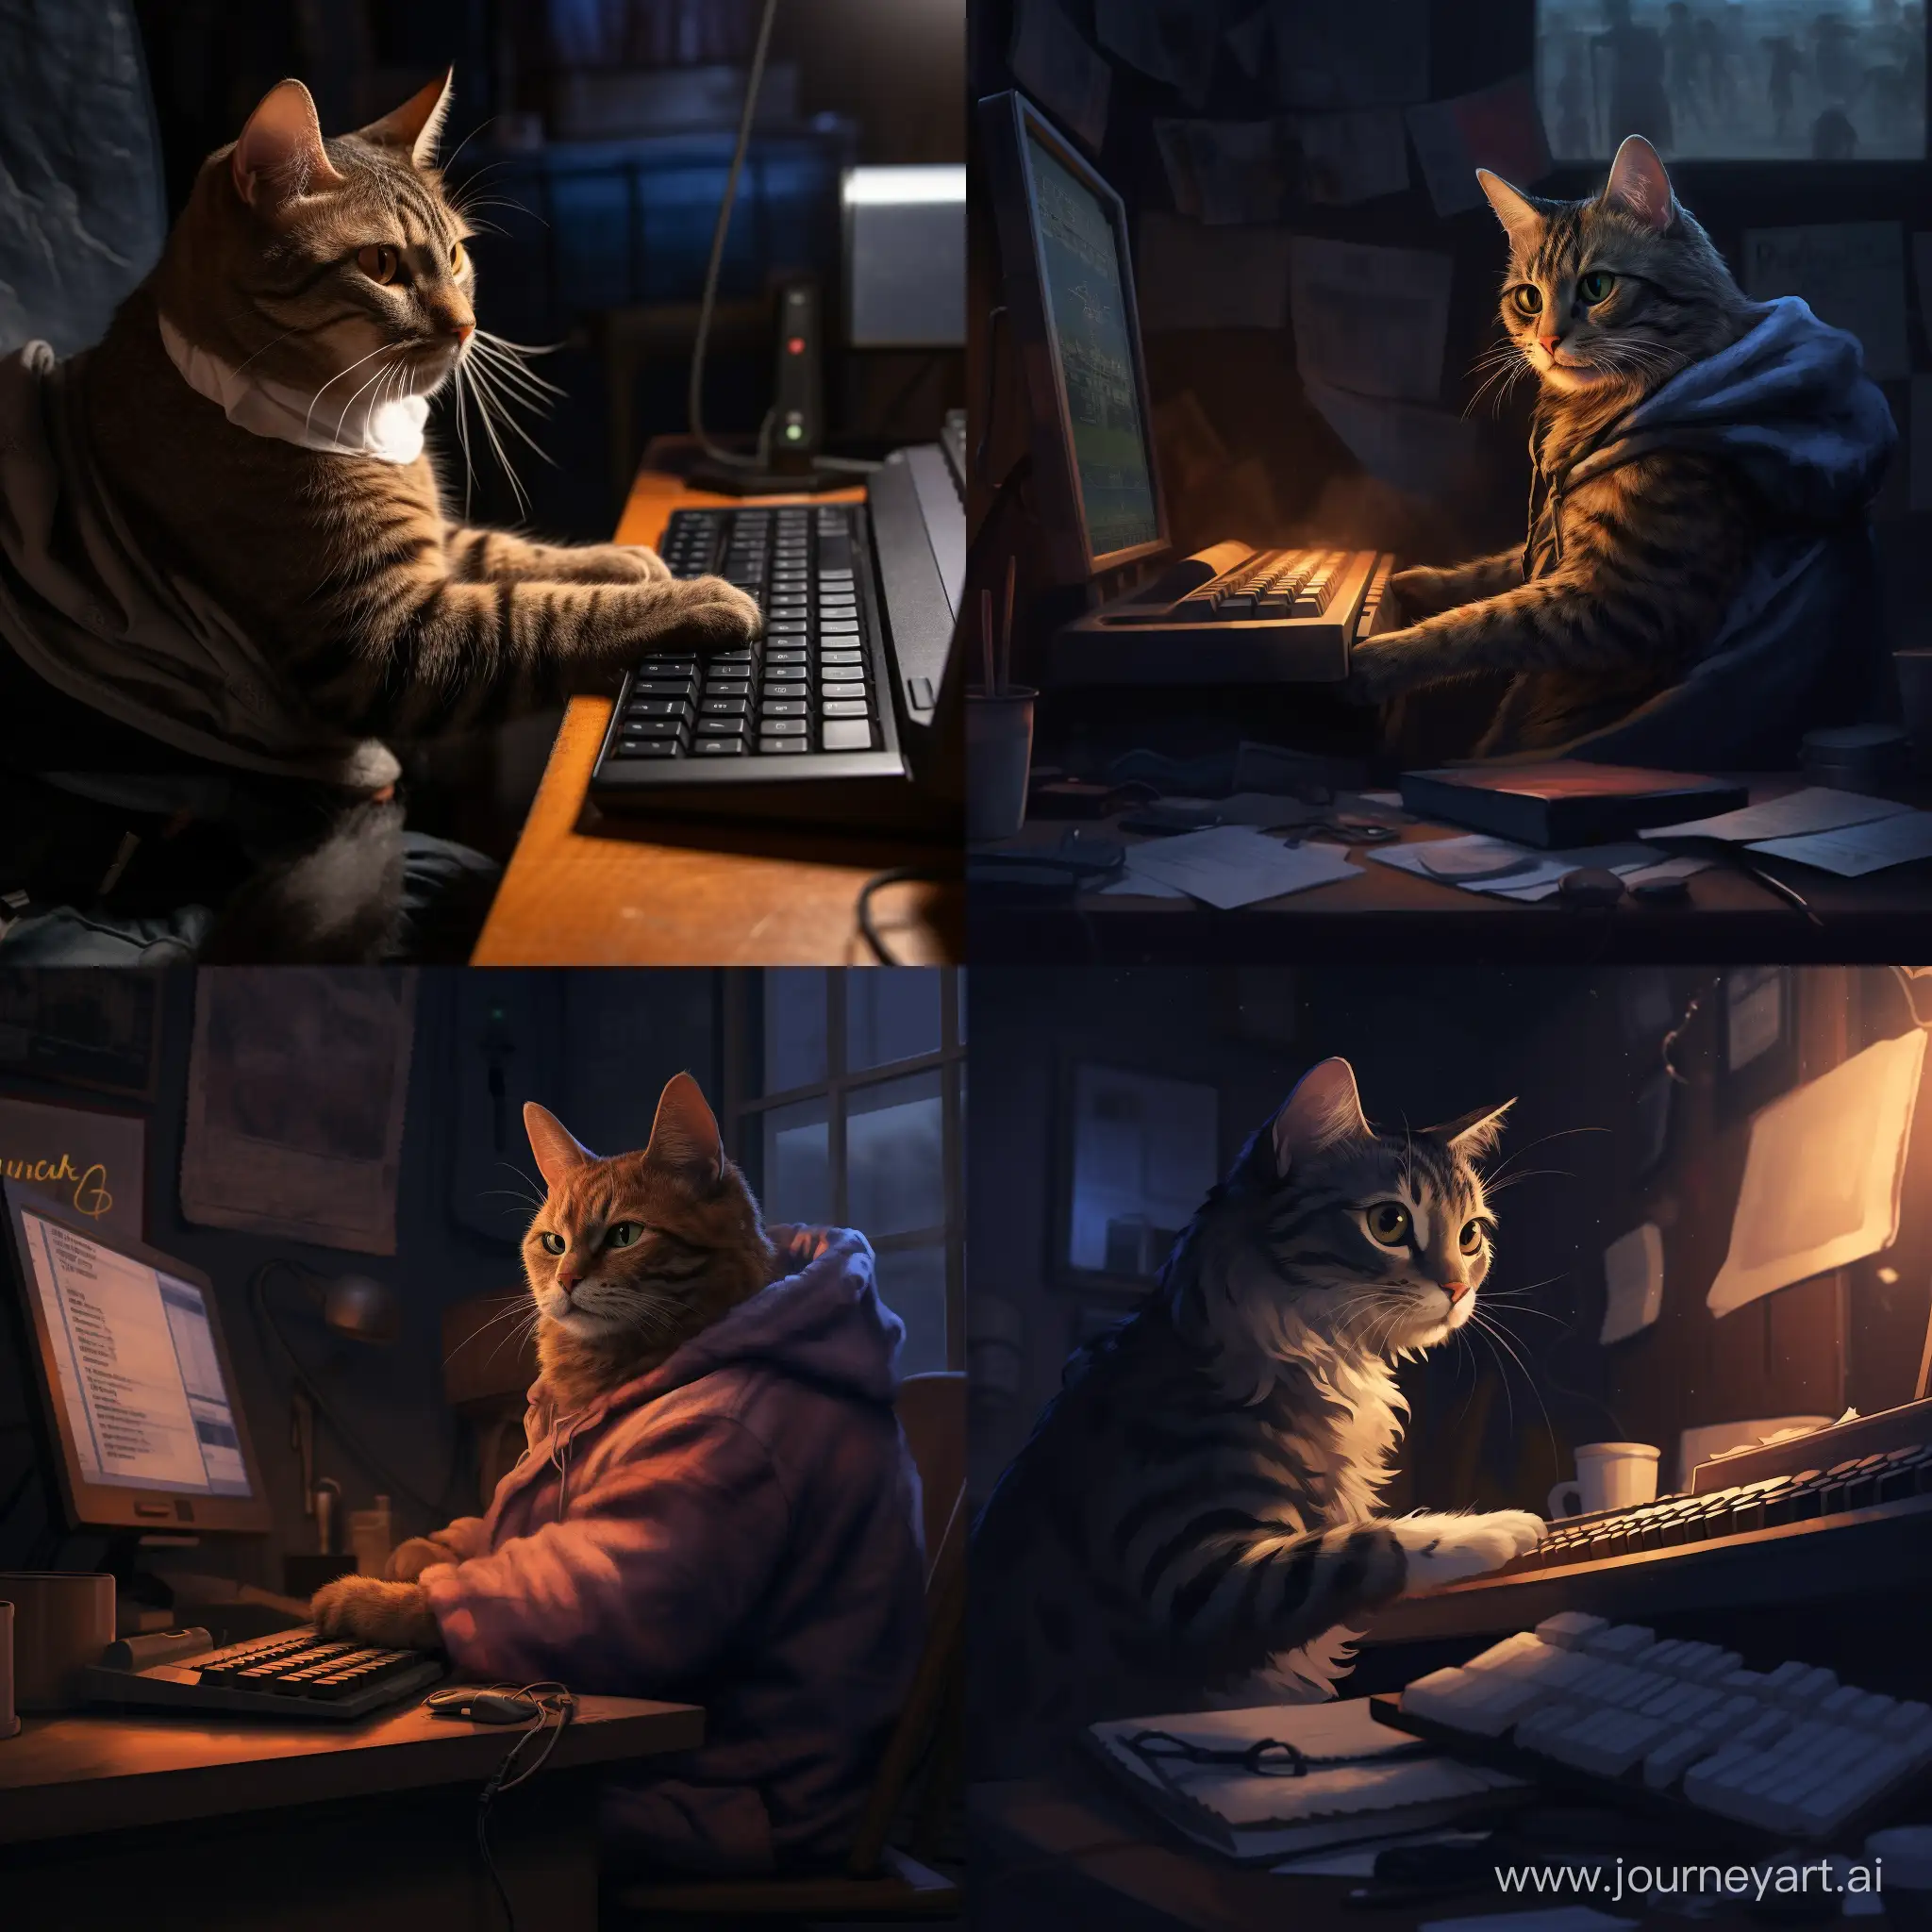 Adorable-Cat-Perched-on-Computer-Keyboard-in-Dimly-Lit-Environment